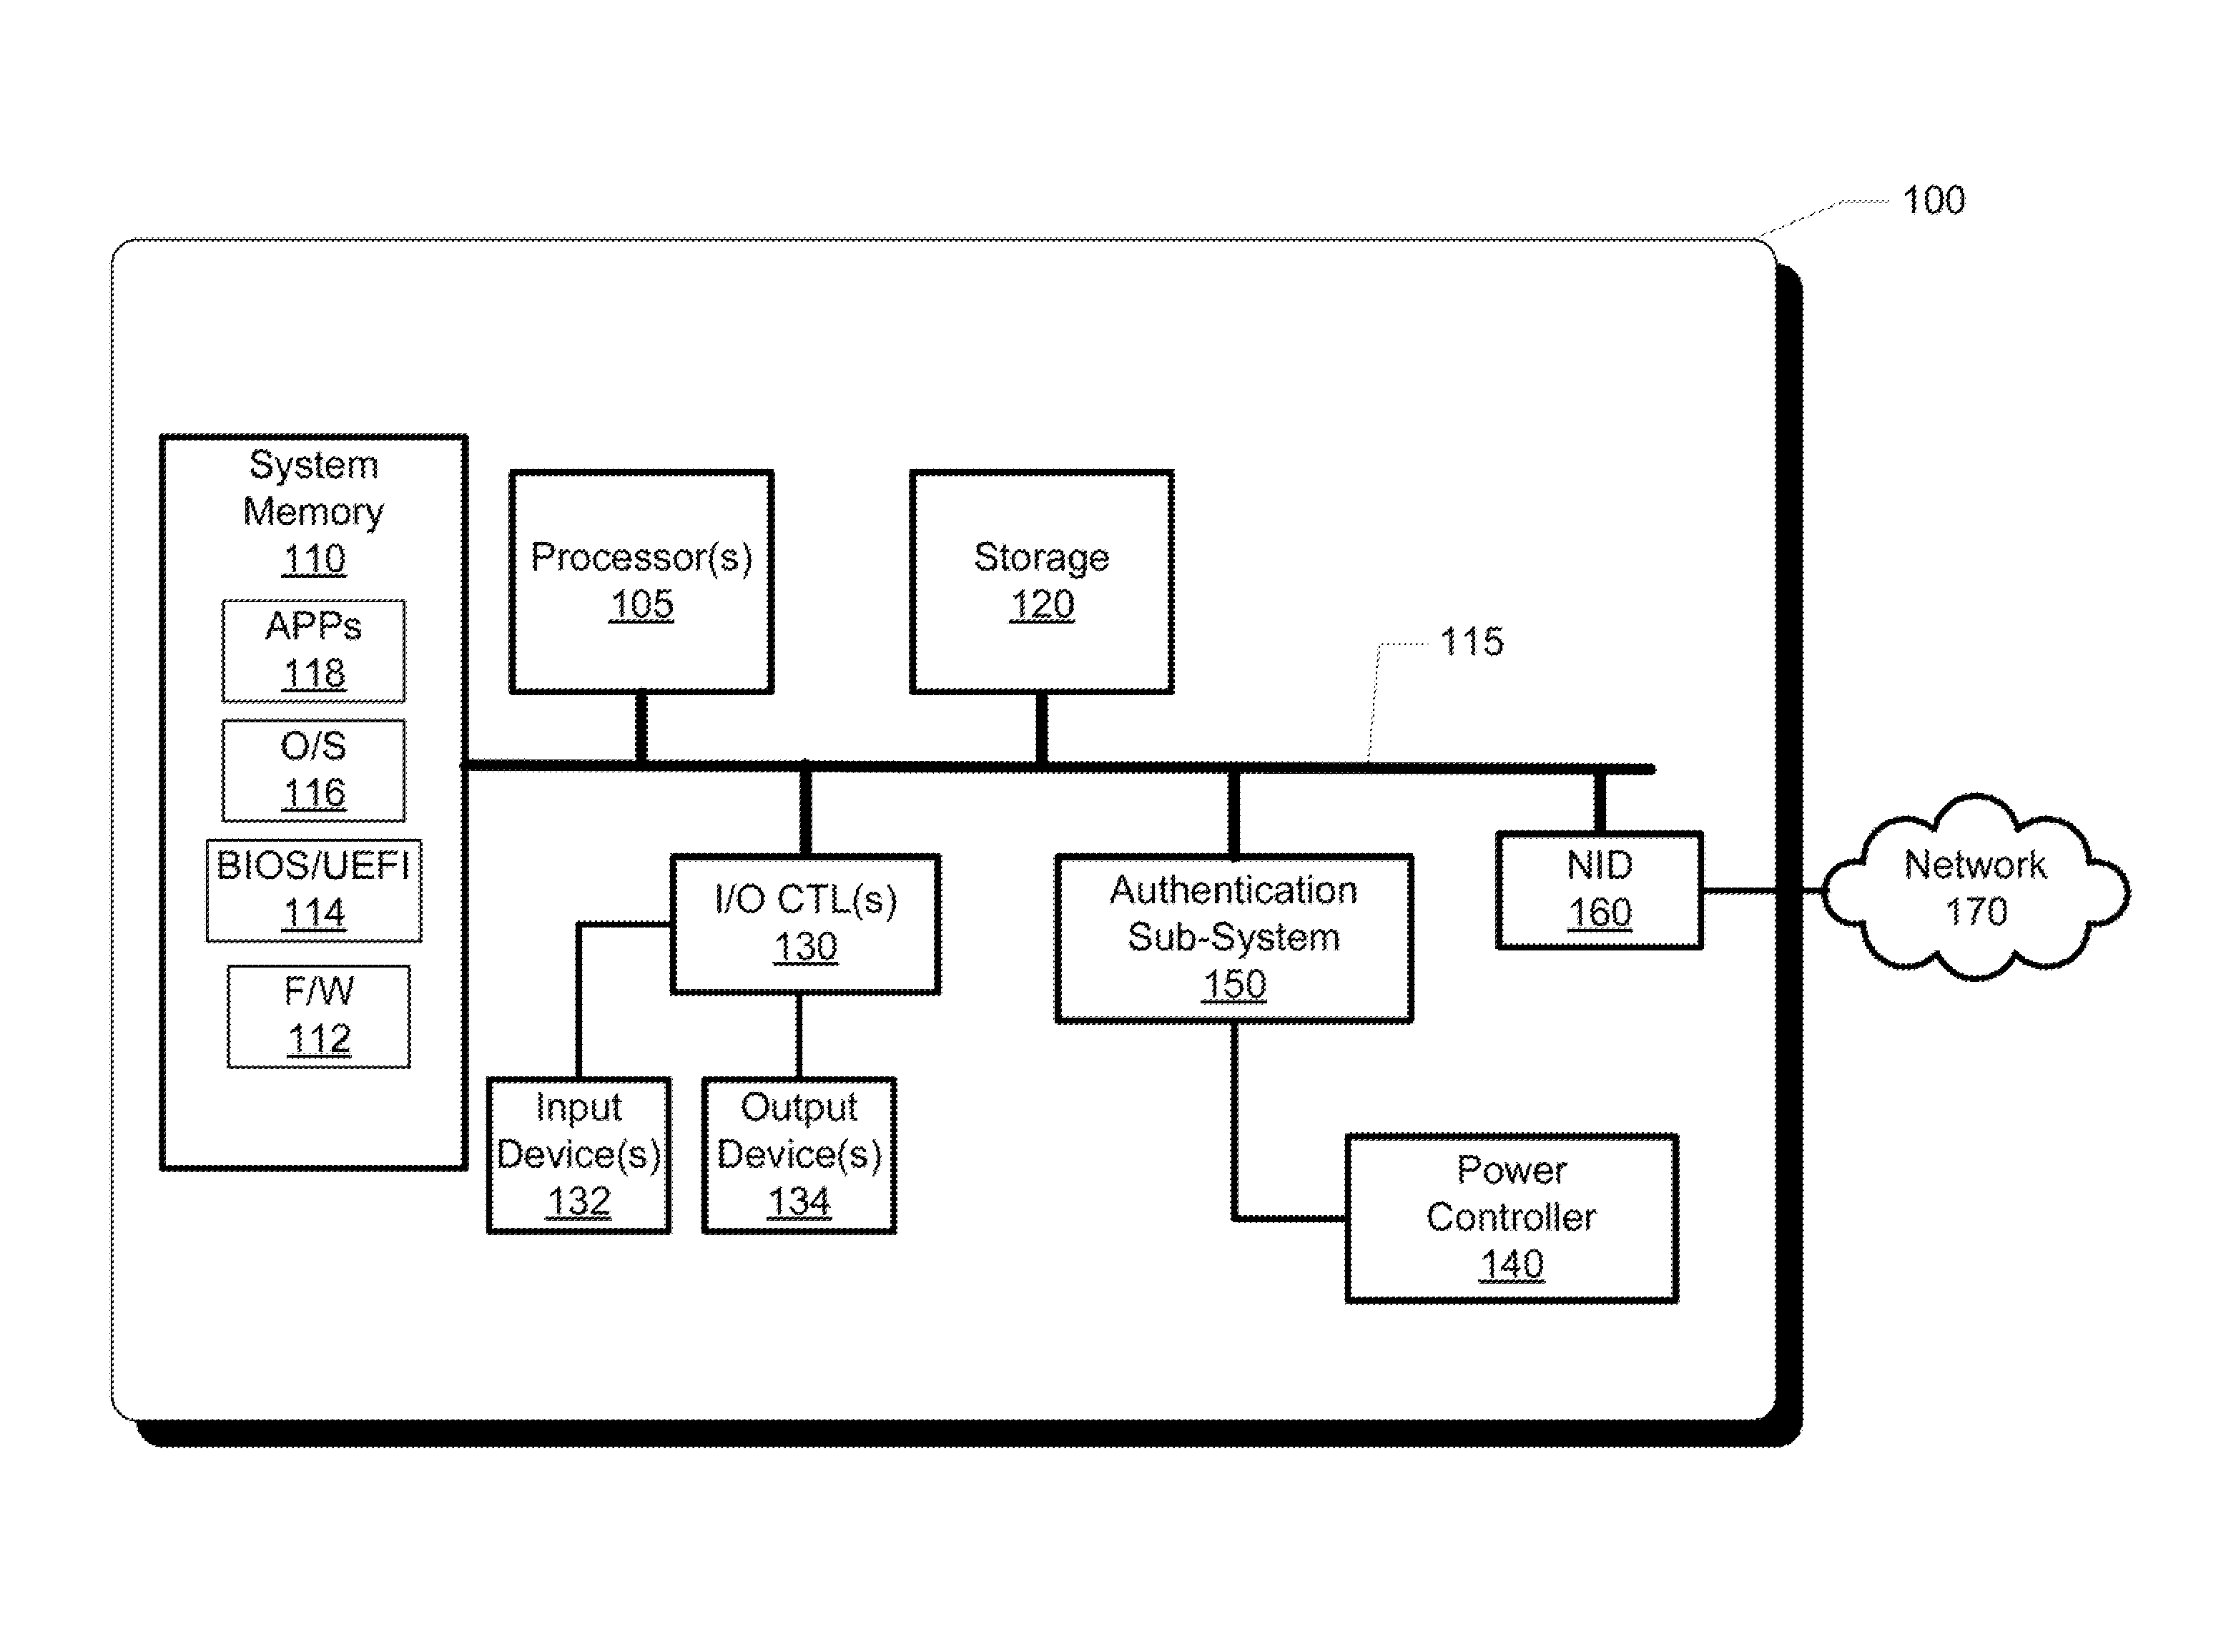 Apparatus and Method for Enabling Fingerprint-Based Secure Access to a User-Authenticated Operational State of an Information Handling System